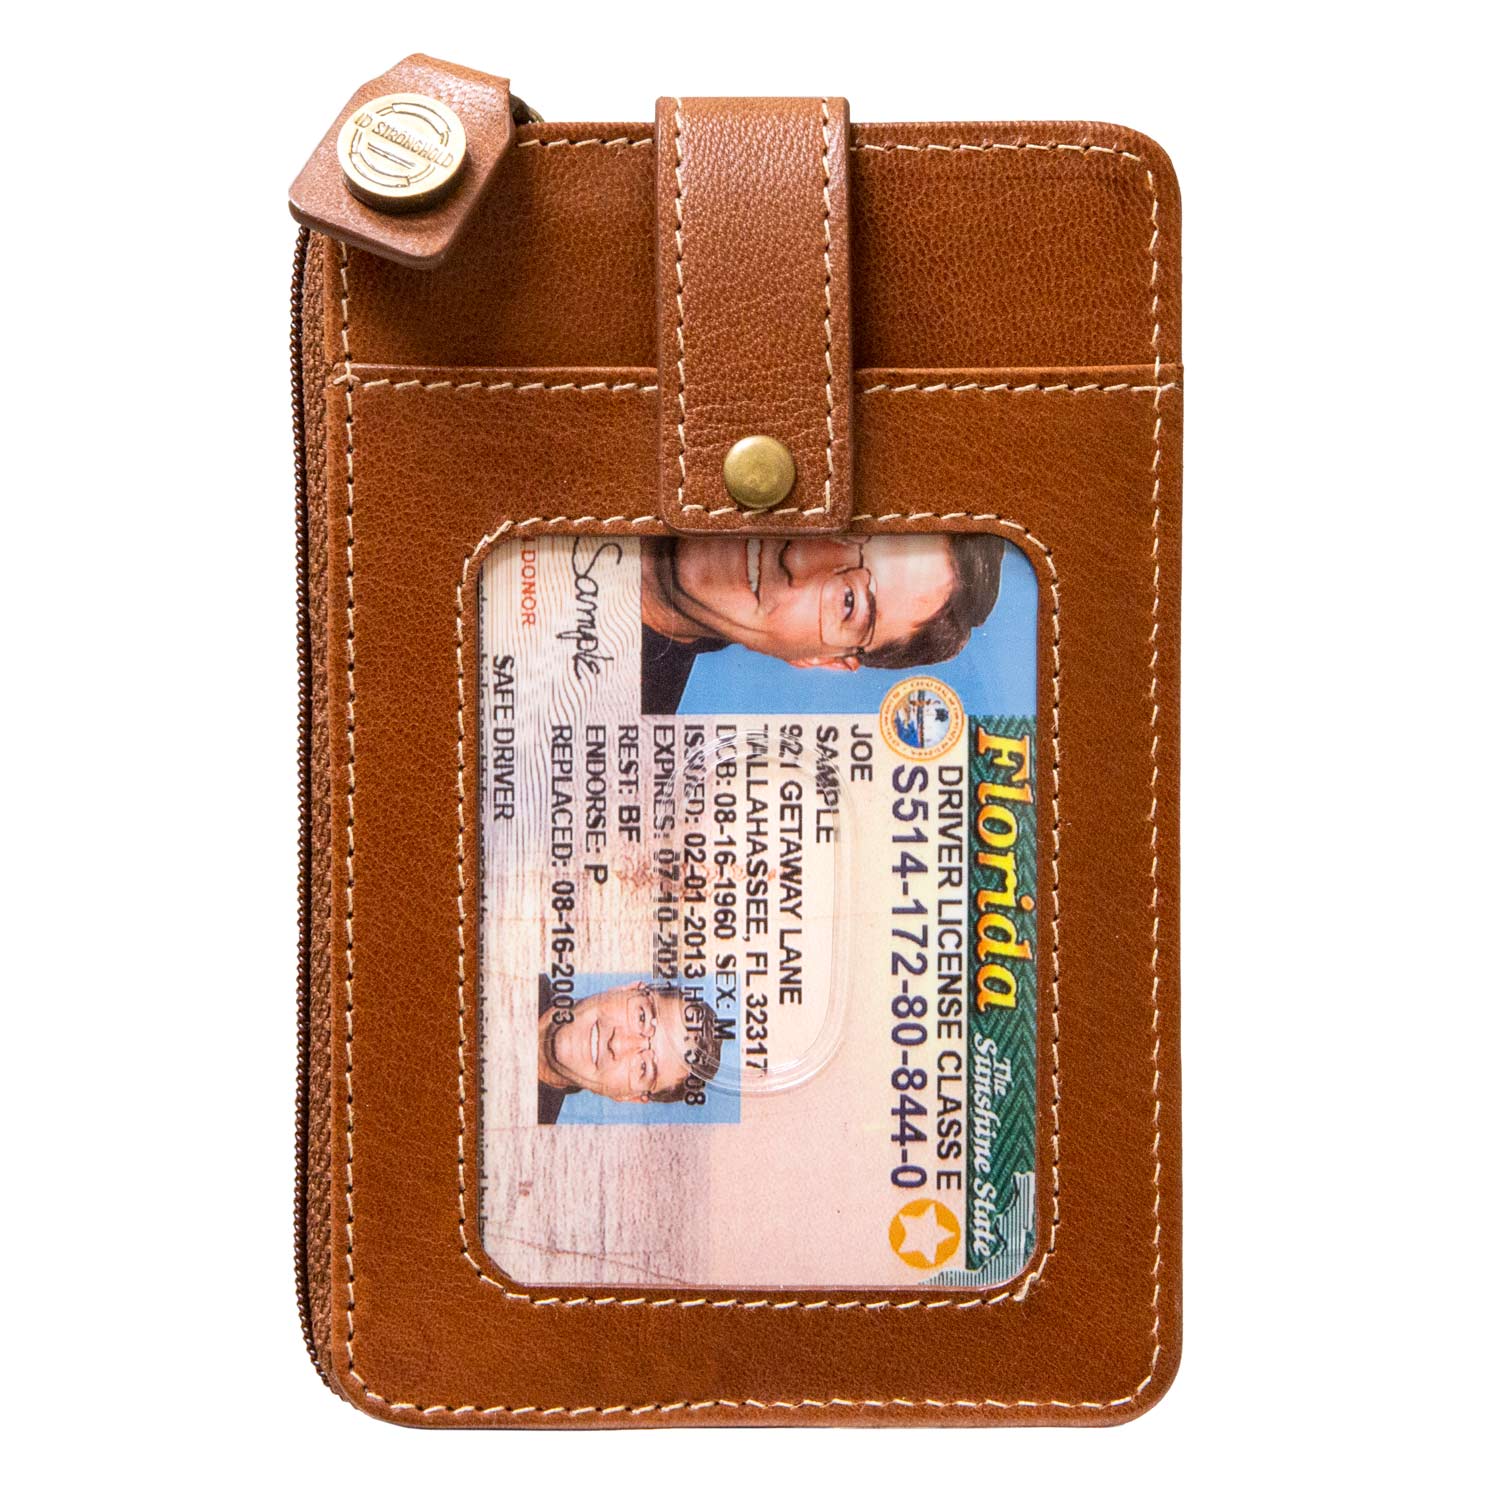 RFID Secure Ultimate Mini Wallet Antiqued Brown by ID Stronghold